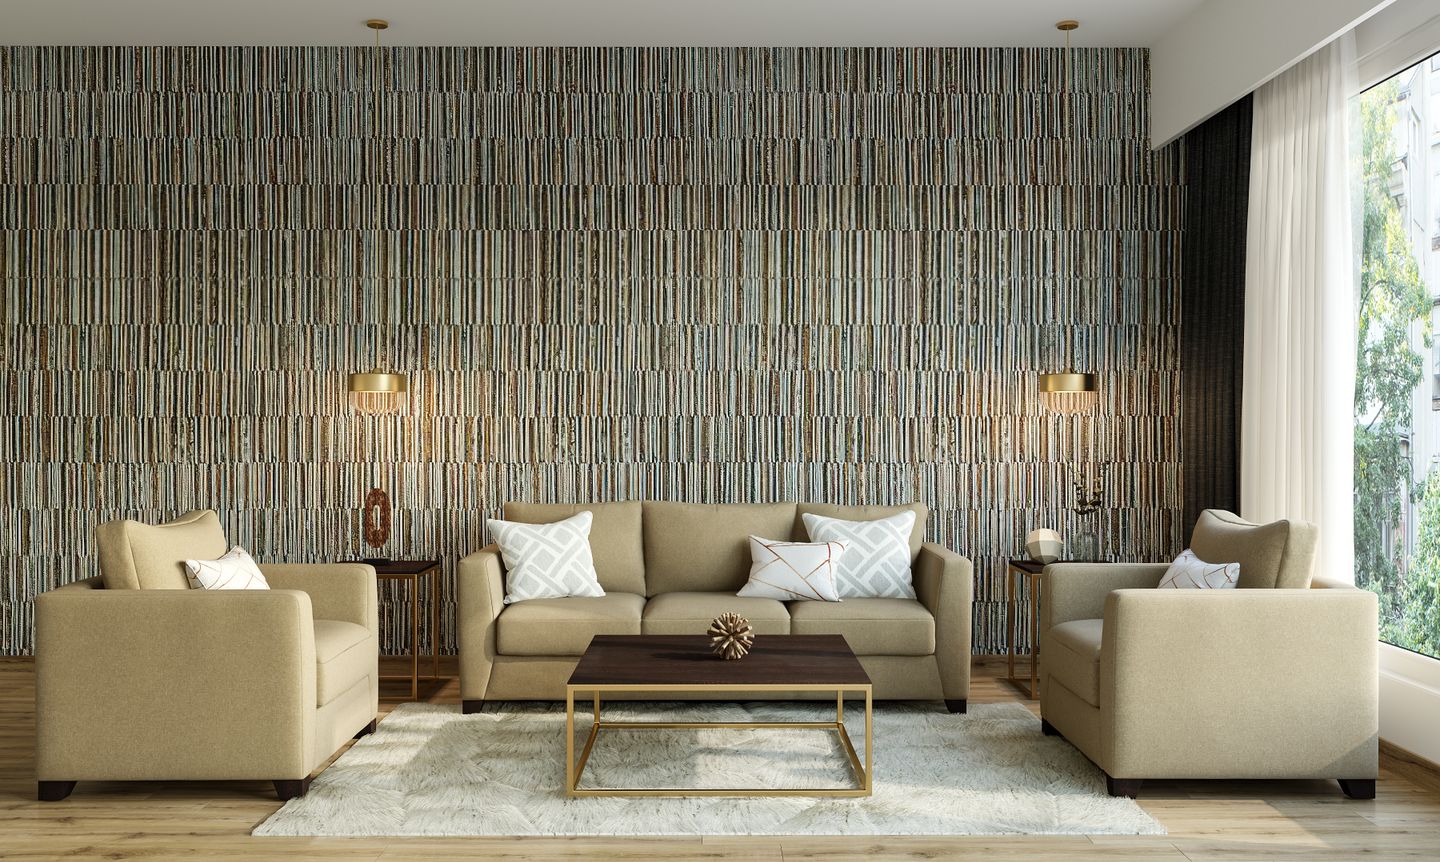 Vintage Luxury Living Room with Wallpaper - Livspace